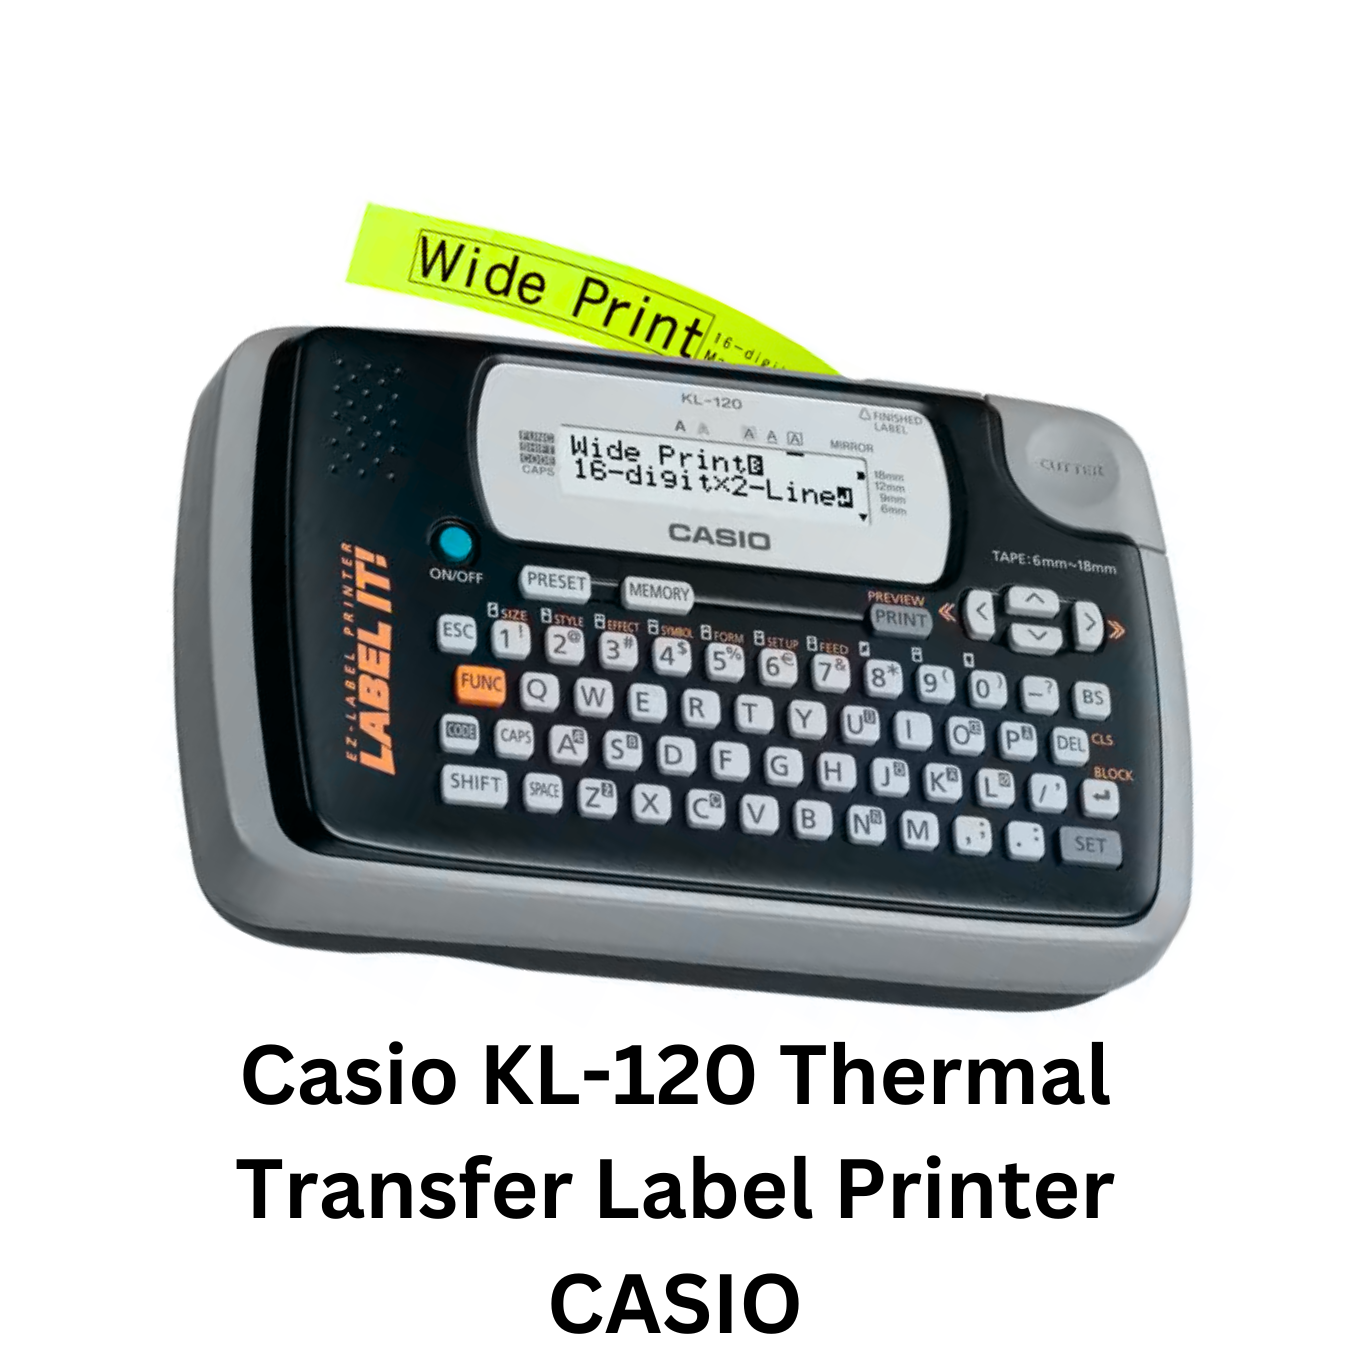 Casio KL-120 Thermal Transfer Label Printer. This compact and versatile label printer from Casio is designed for efficient and high-quality label printing. With its user-friendly interface, it's perfect for various labeling tasks